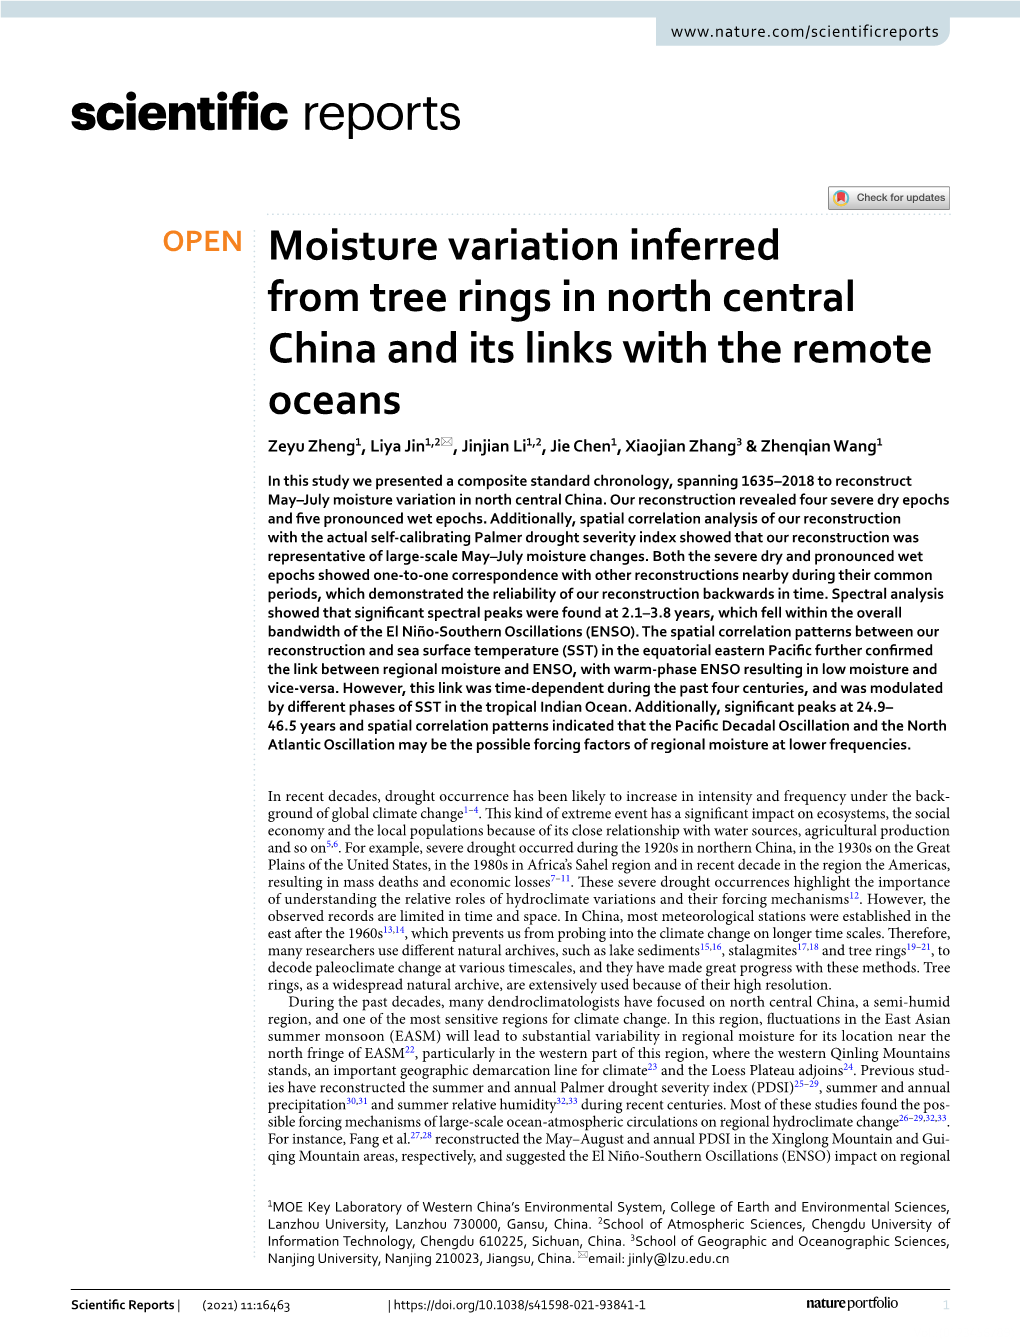 Moisture Variation Inferred from Tree Rings in North Central China and Its Links with the Remote Oceans